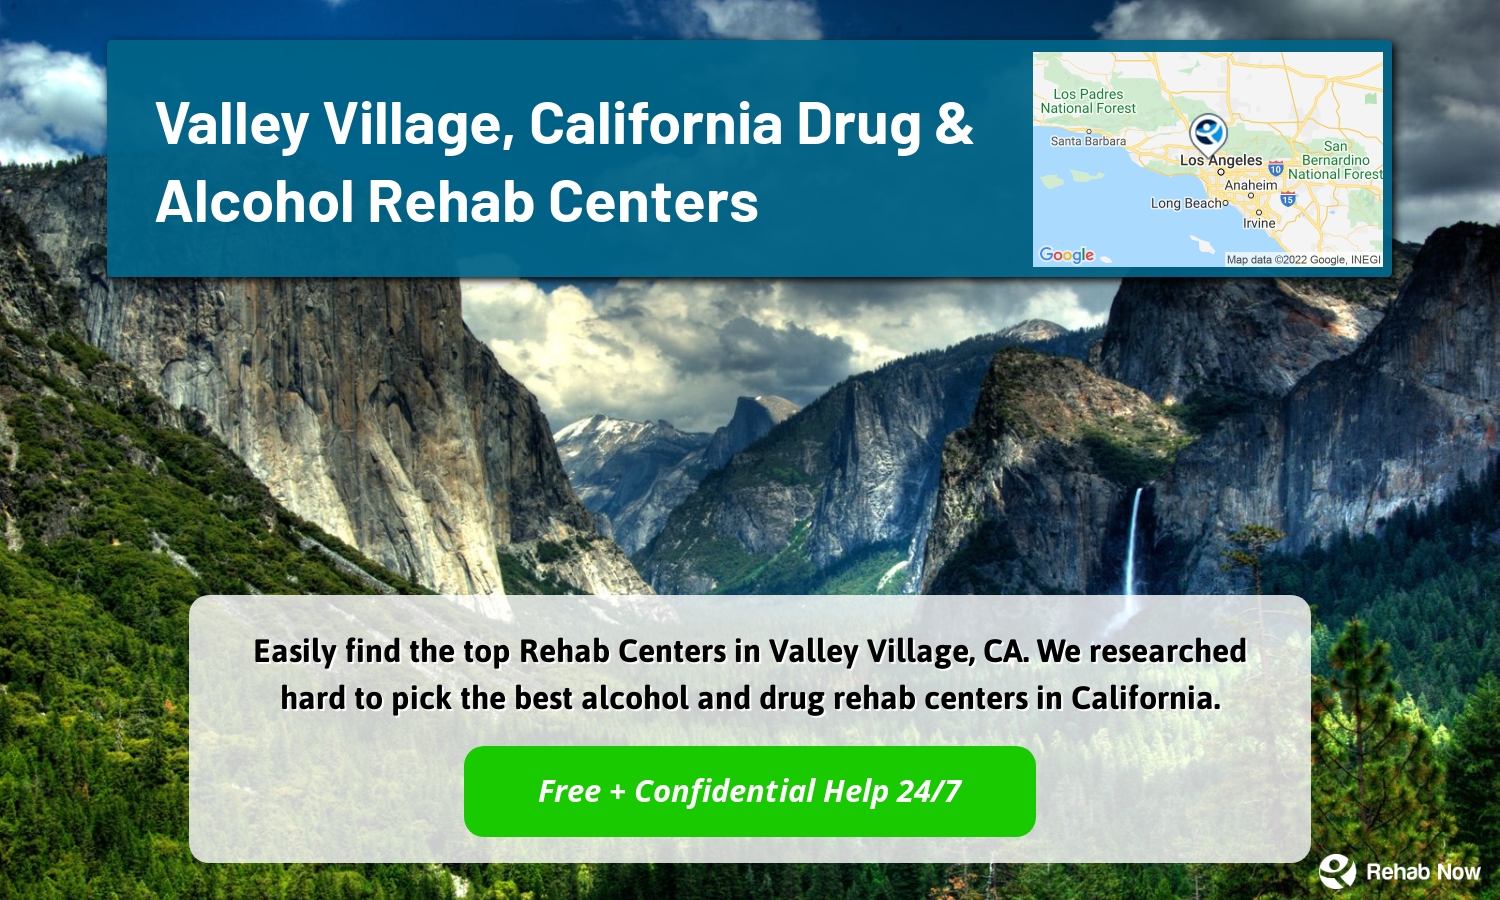 Easily find the top Rehab Centers in Valley Village, CA. We researched hard to pick the best alcohol and drug rehab centers in California.